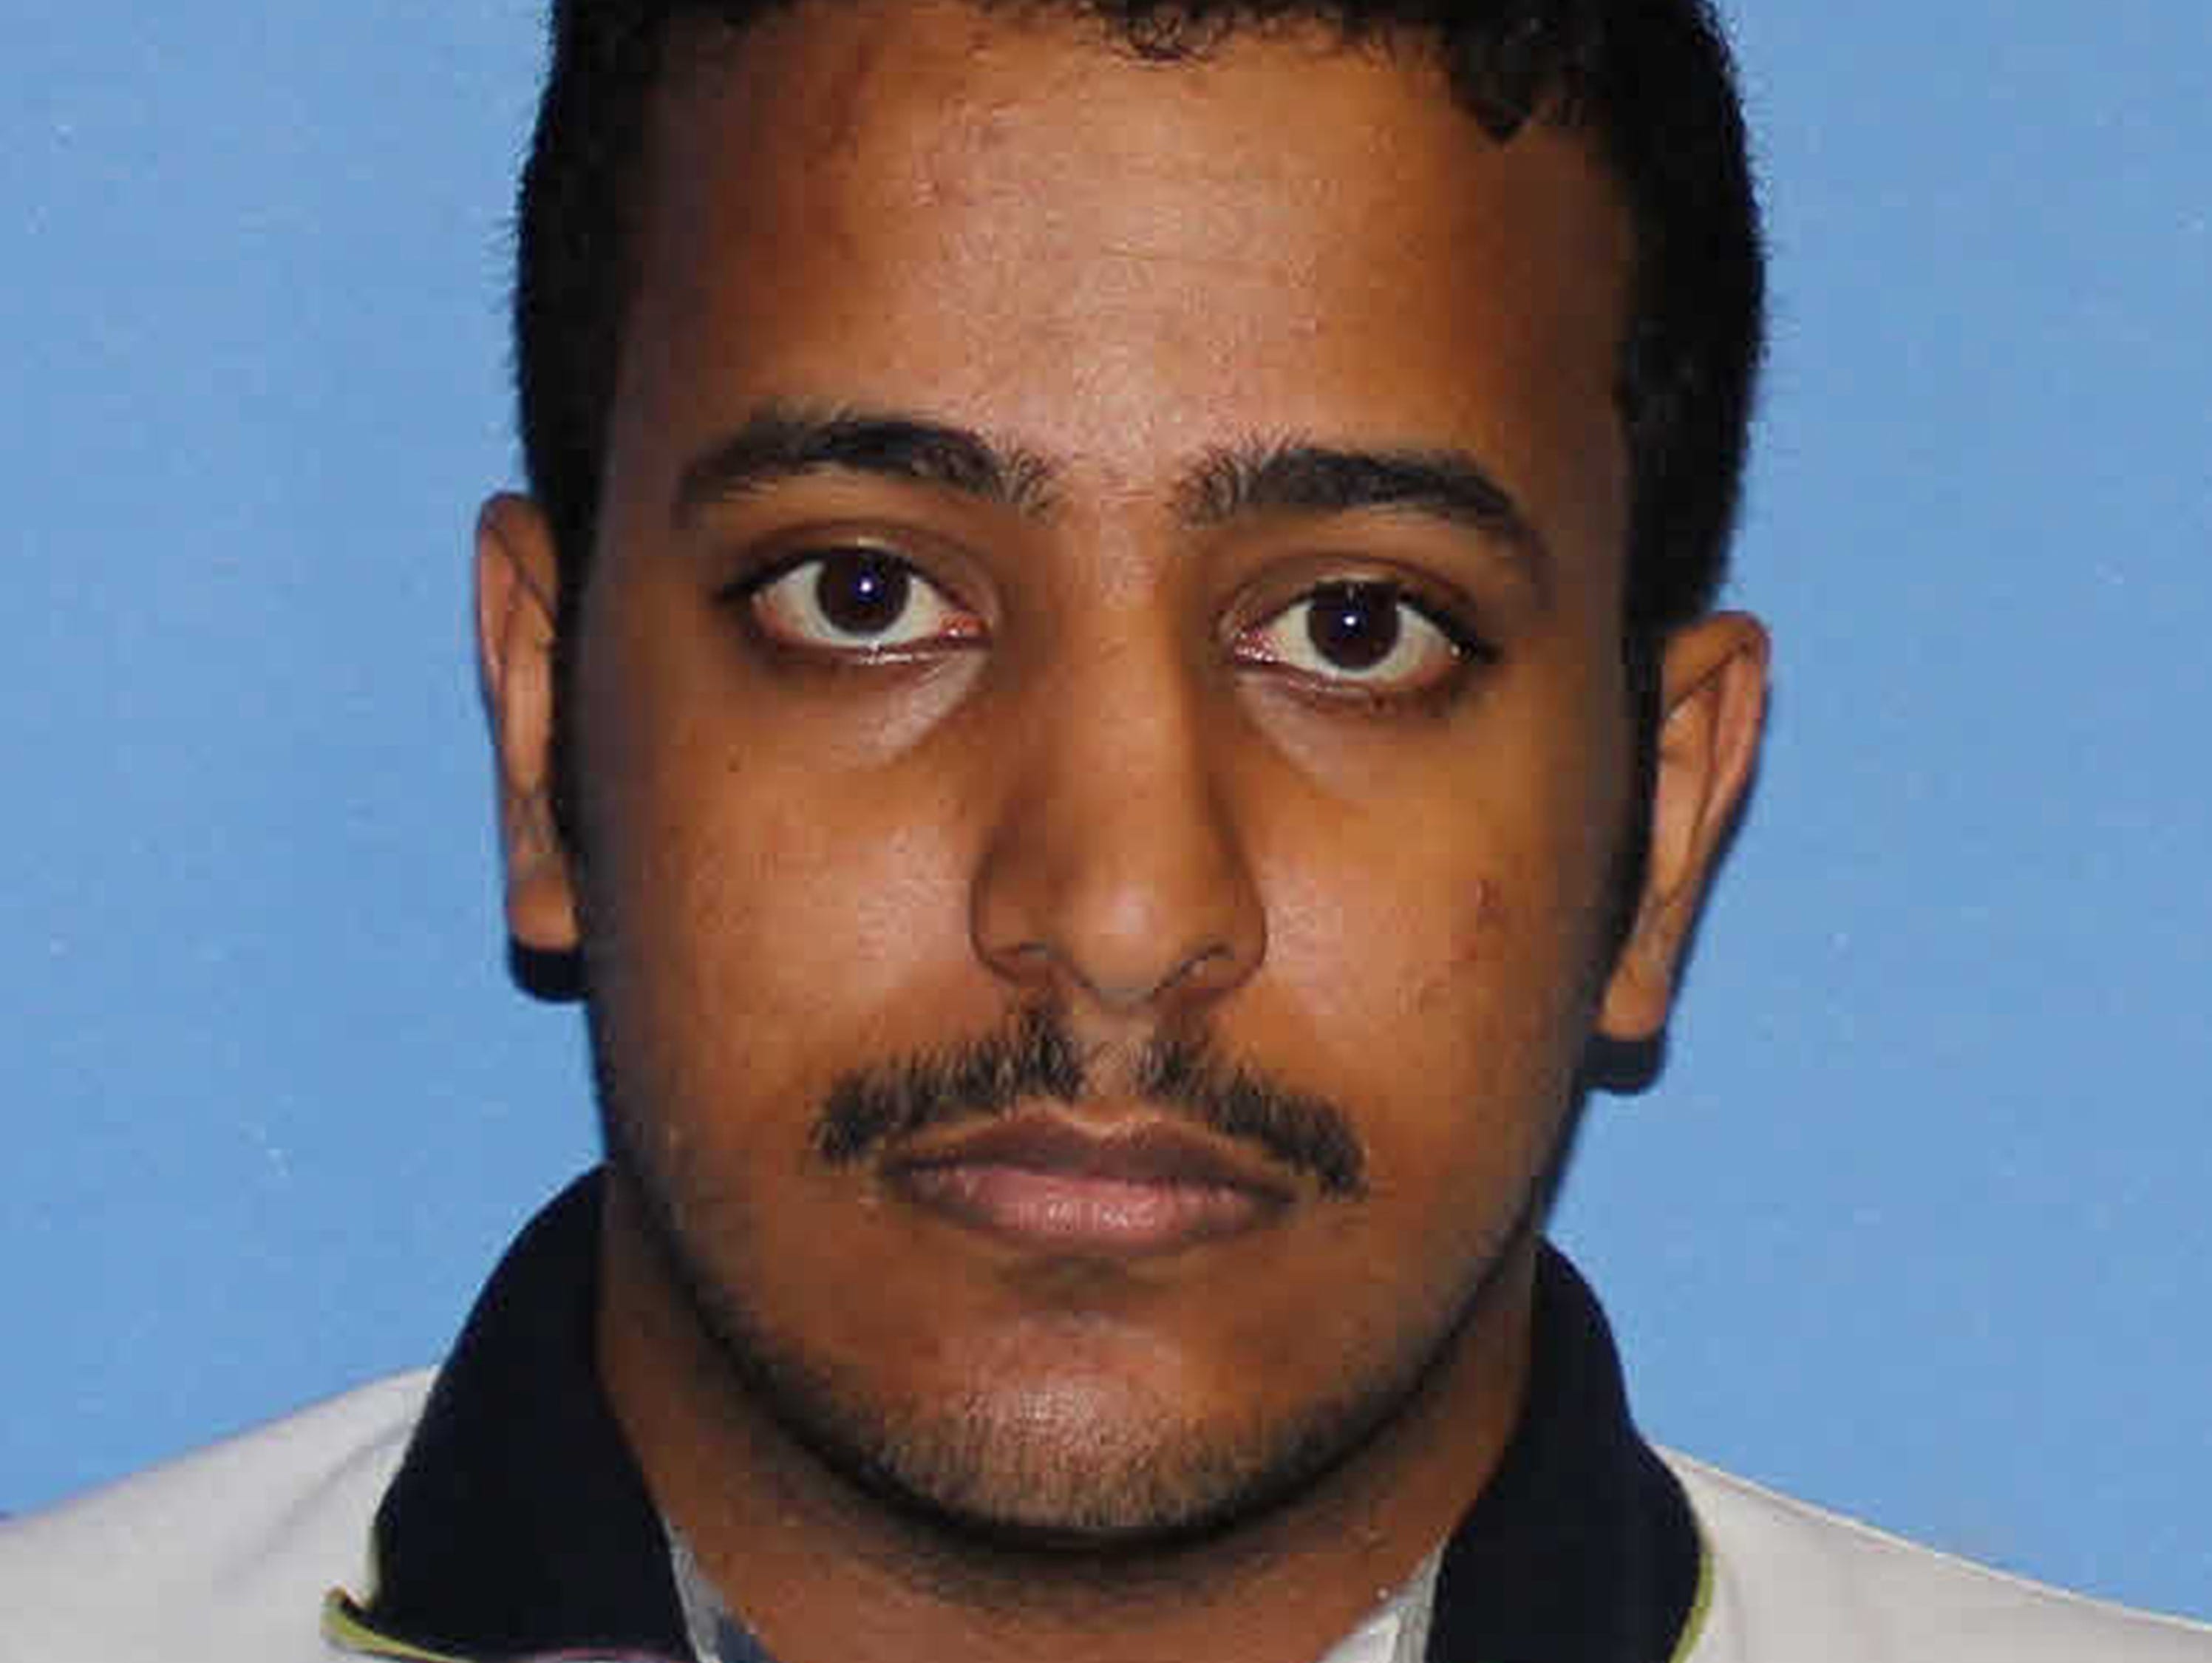 Hussain Saeed Alnahdi, 24, was assaulted Oct. 30, 2016, in Menomonie, Wis., and the junior at the University of Wisconsin-Stout who was from Saudi Arabia died the next day.